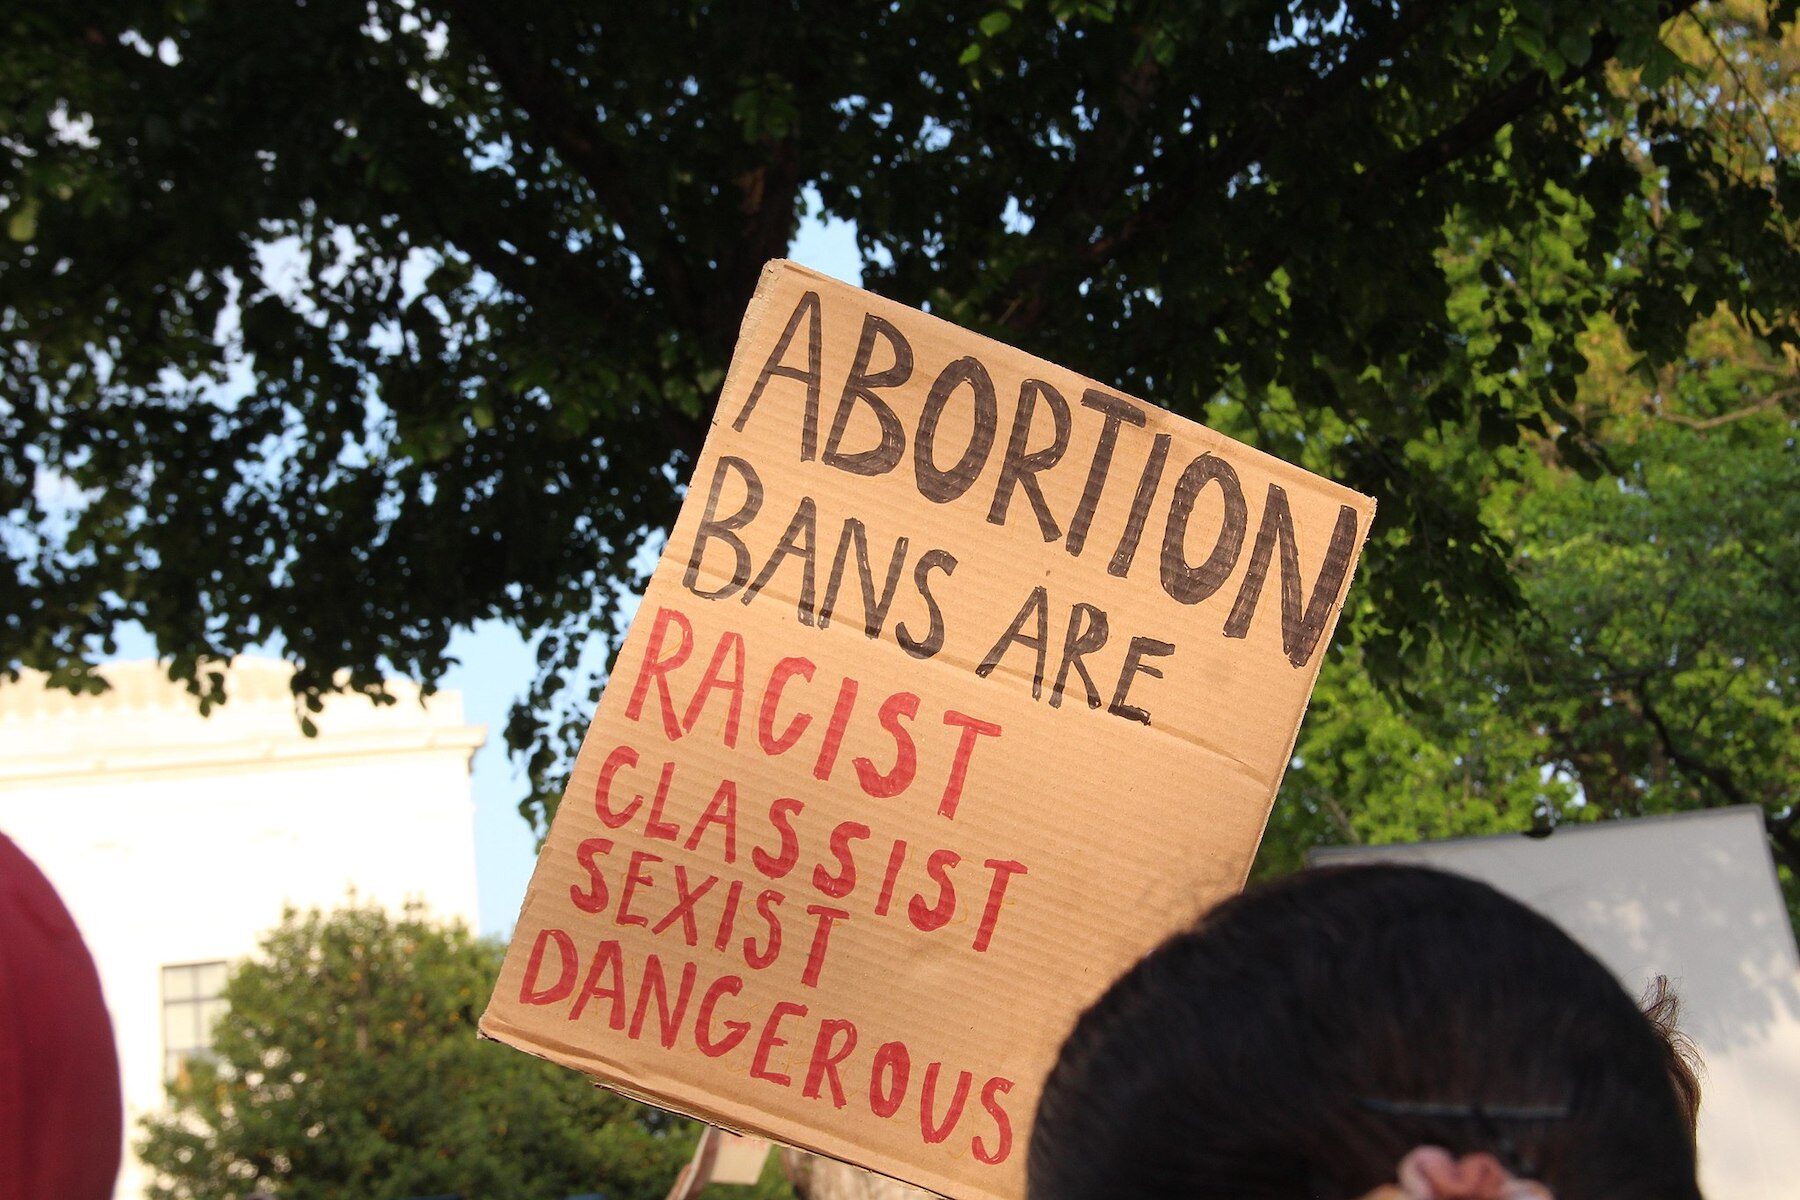 A sign held at demonstration in front of the US Supreme Court on May 3 2022. The sign says Abortion Bans are Racist Classist Sexist Dangerous. Photo by Janni Rye via Wikimedia Commons.